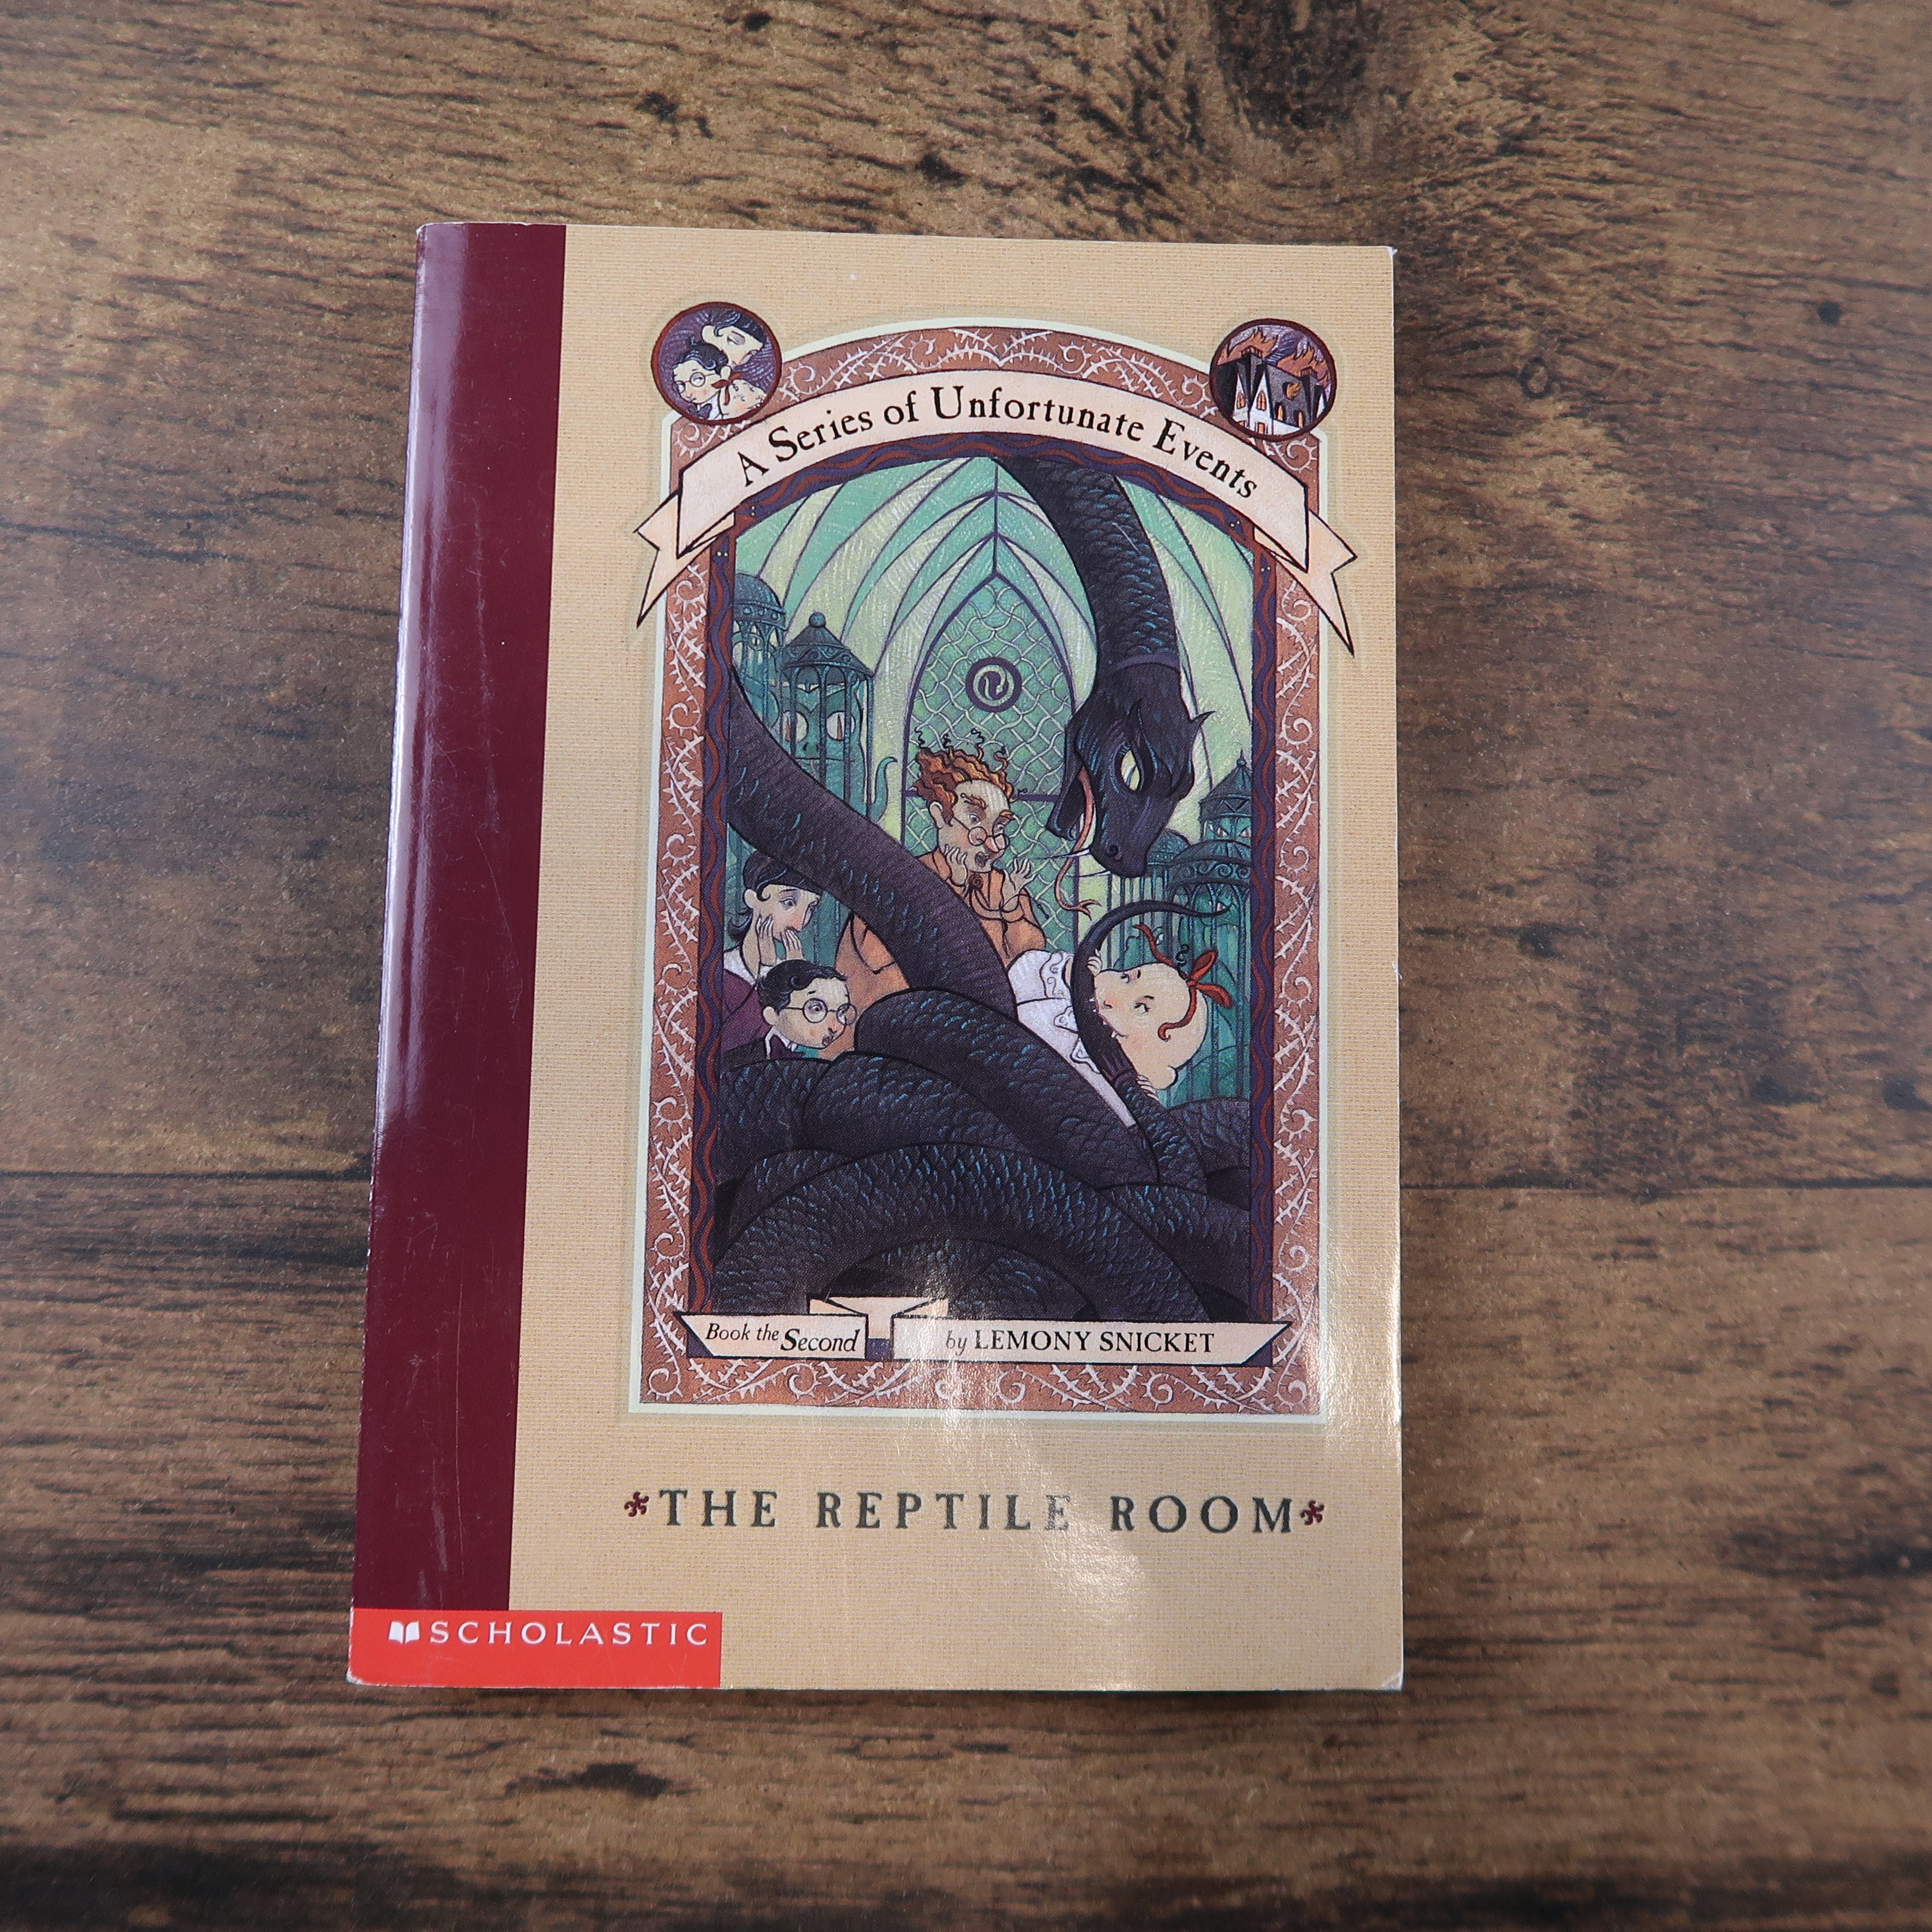 Lemony Snicket - The Reptile Room (Book)